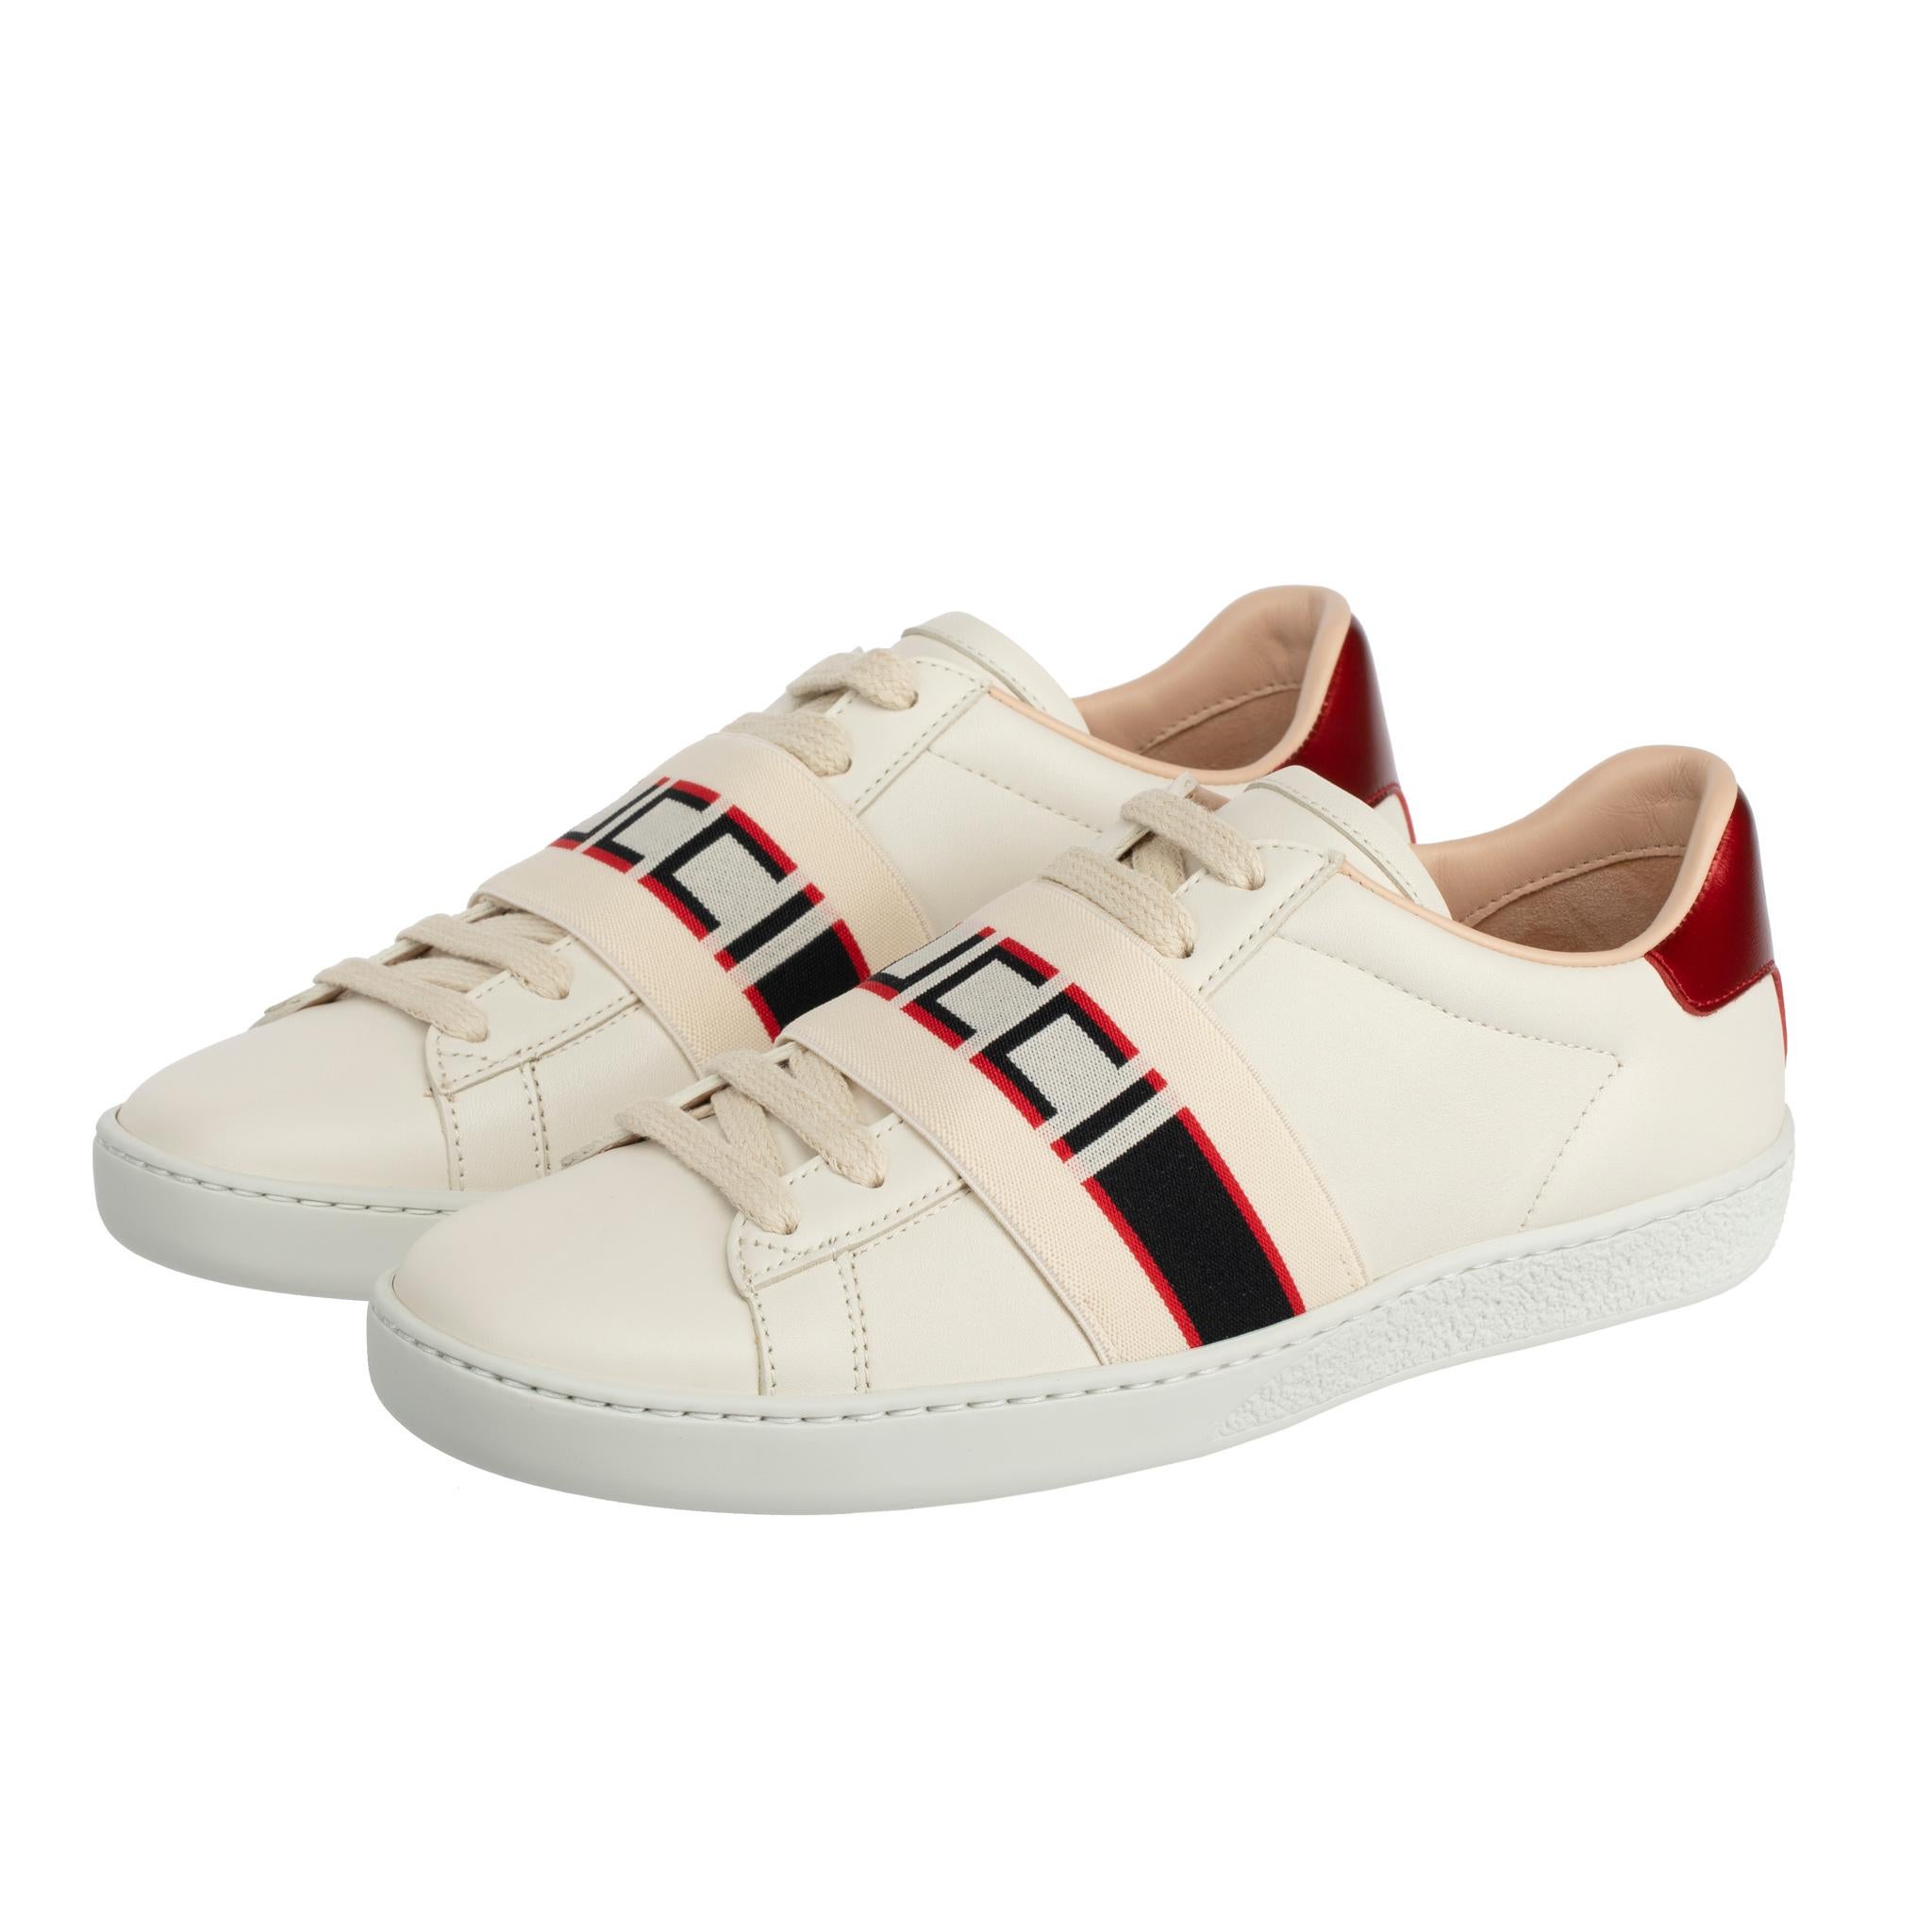 Gucci Ace Turnschuhe in Off-White & Metallic Rot 35.5 IT im Angebot 2